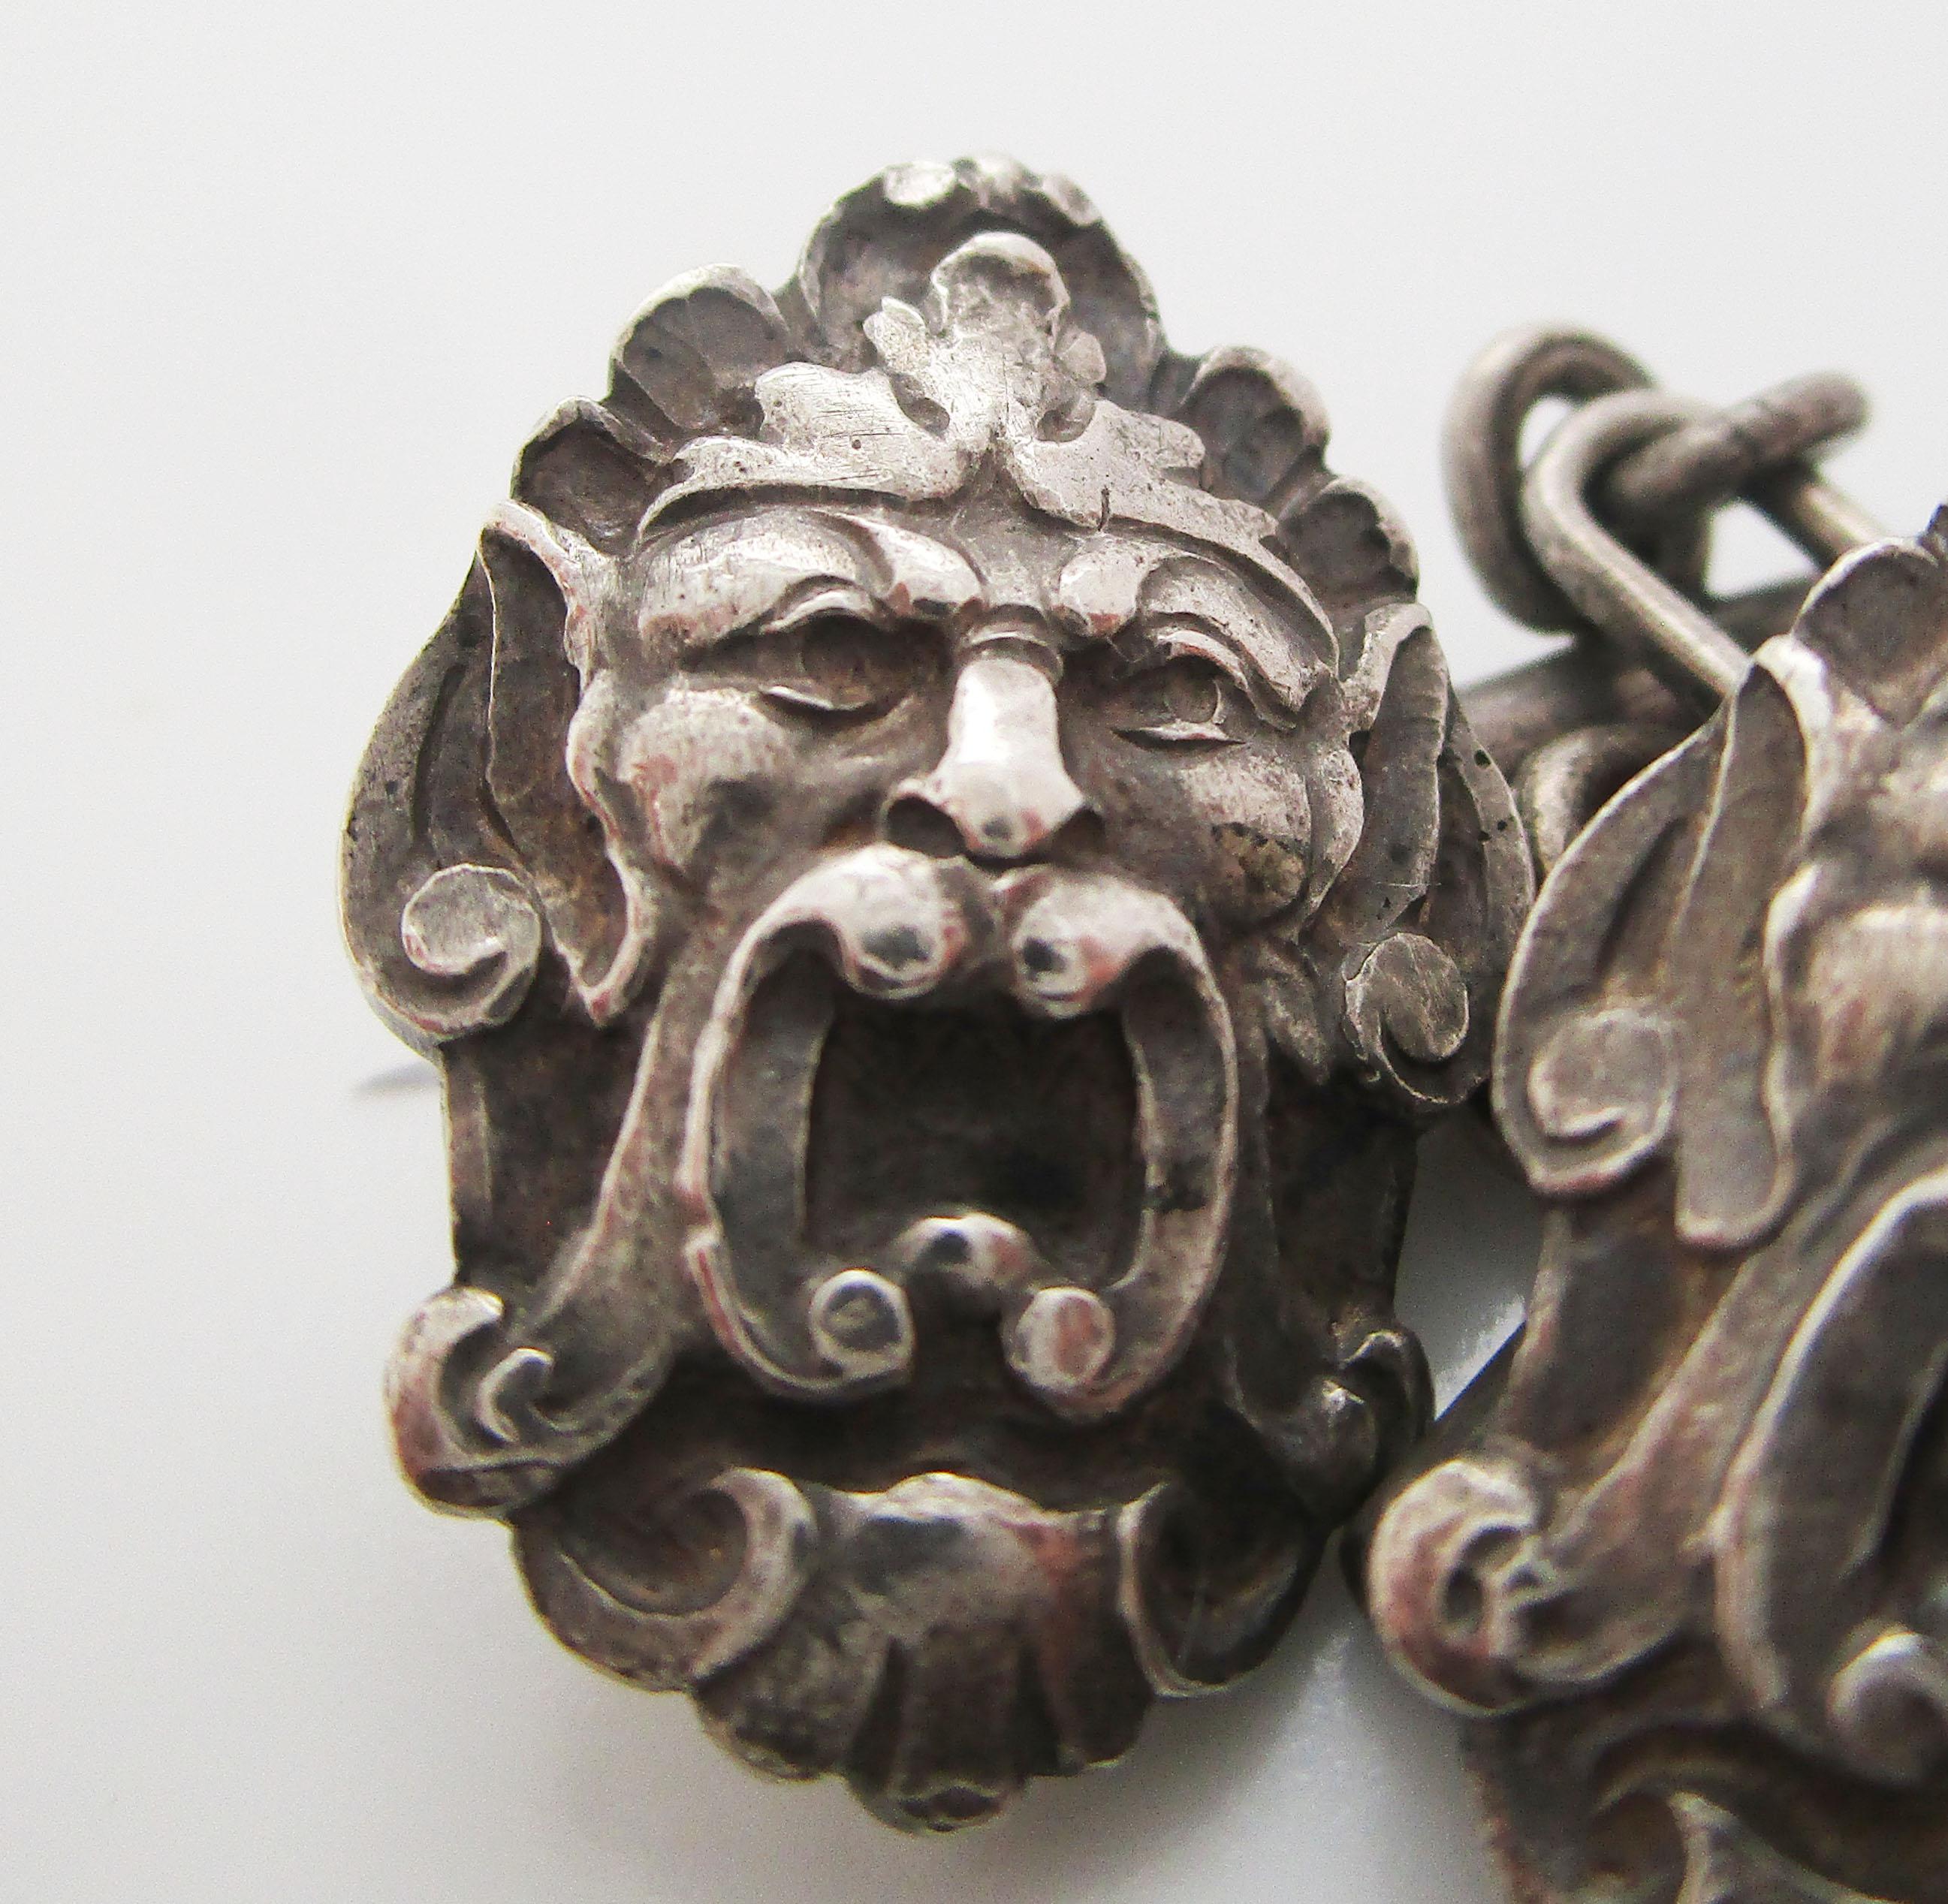 This fantastic pair of Art Nouveau cufflinks is in sterling silver and has a skillfully crafted grotesque mask design. The face depicted on these links could be that of a dramatic Greek mask, or perhaps that of an ancient Norse wind god. No matter